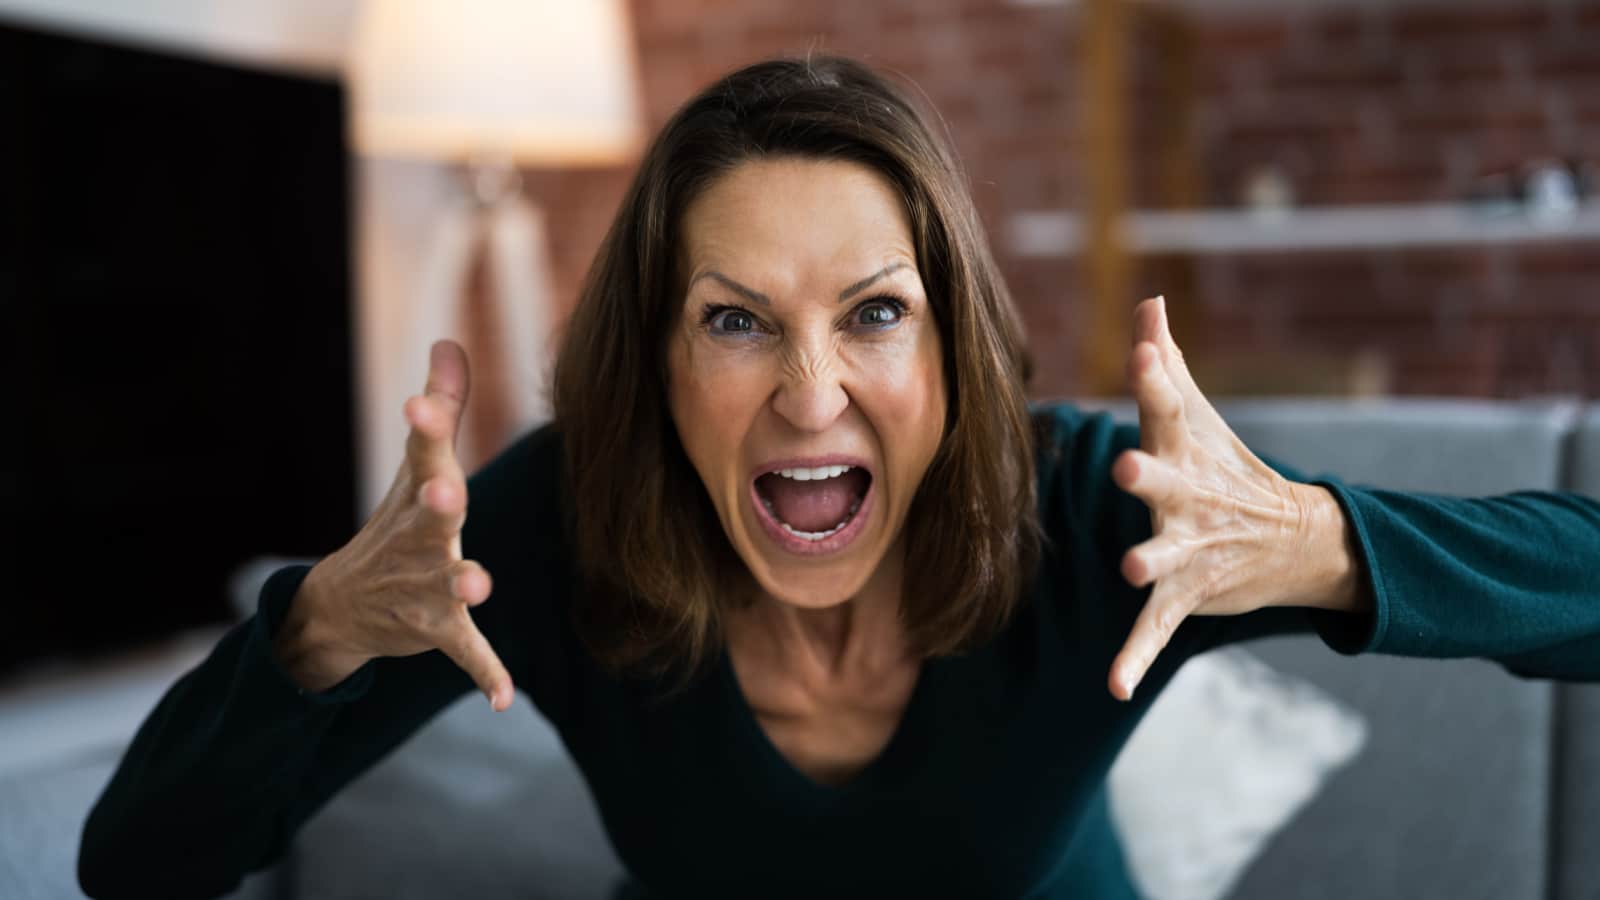 angry woman screaming complaining